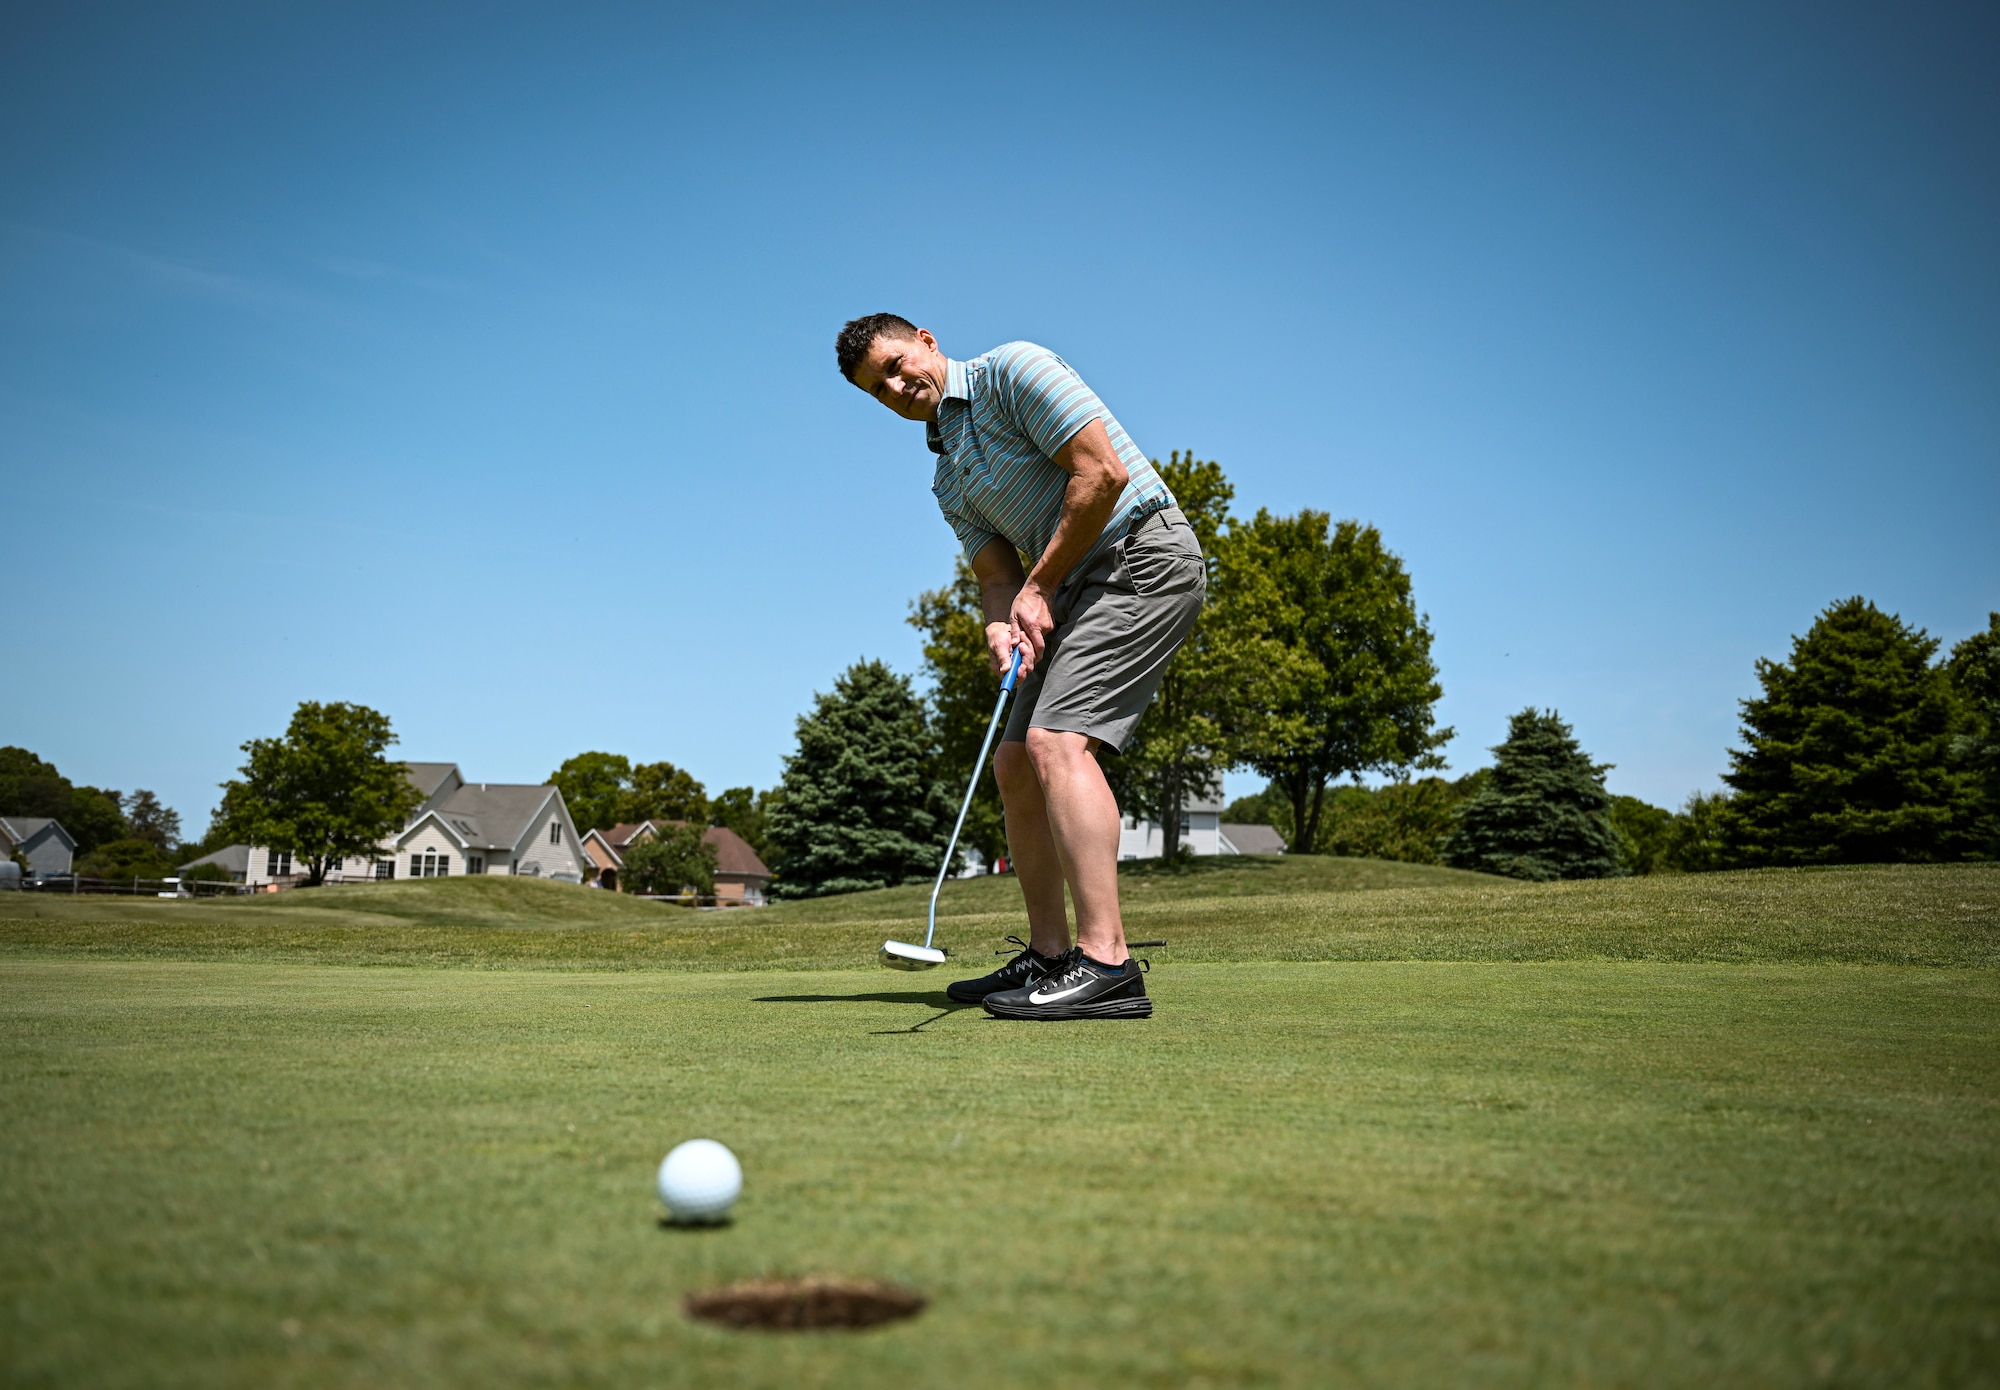 A participant putts a golf ball during the Bluesuiters Golf Tournament at Jonathan’s Landing Golf Course in Magnolia, Delaware, May 11, 2023. Bluesuiters is a biannual golf tournament aimed at connecting Team Dover Airmen with local civic and business leaders. (U.S. Air Force photo by Staff Sgt. Marco A. Gomez)